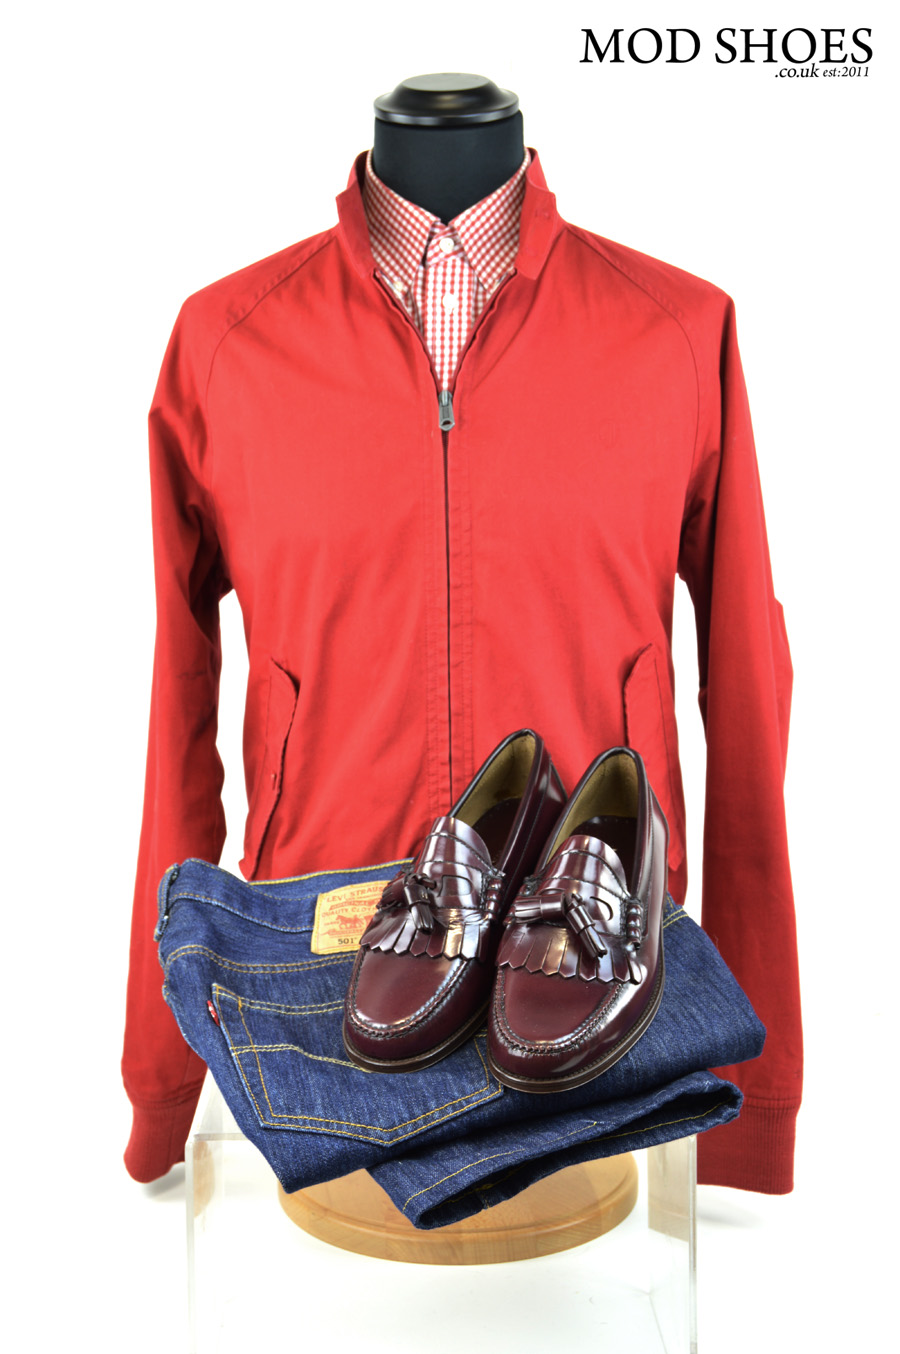 modshoes oxblood burgundy tassel loafers with jeans and harrington